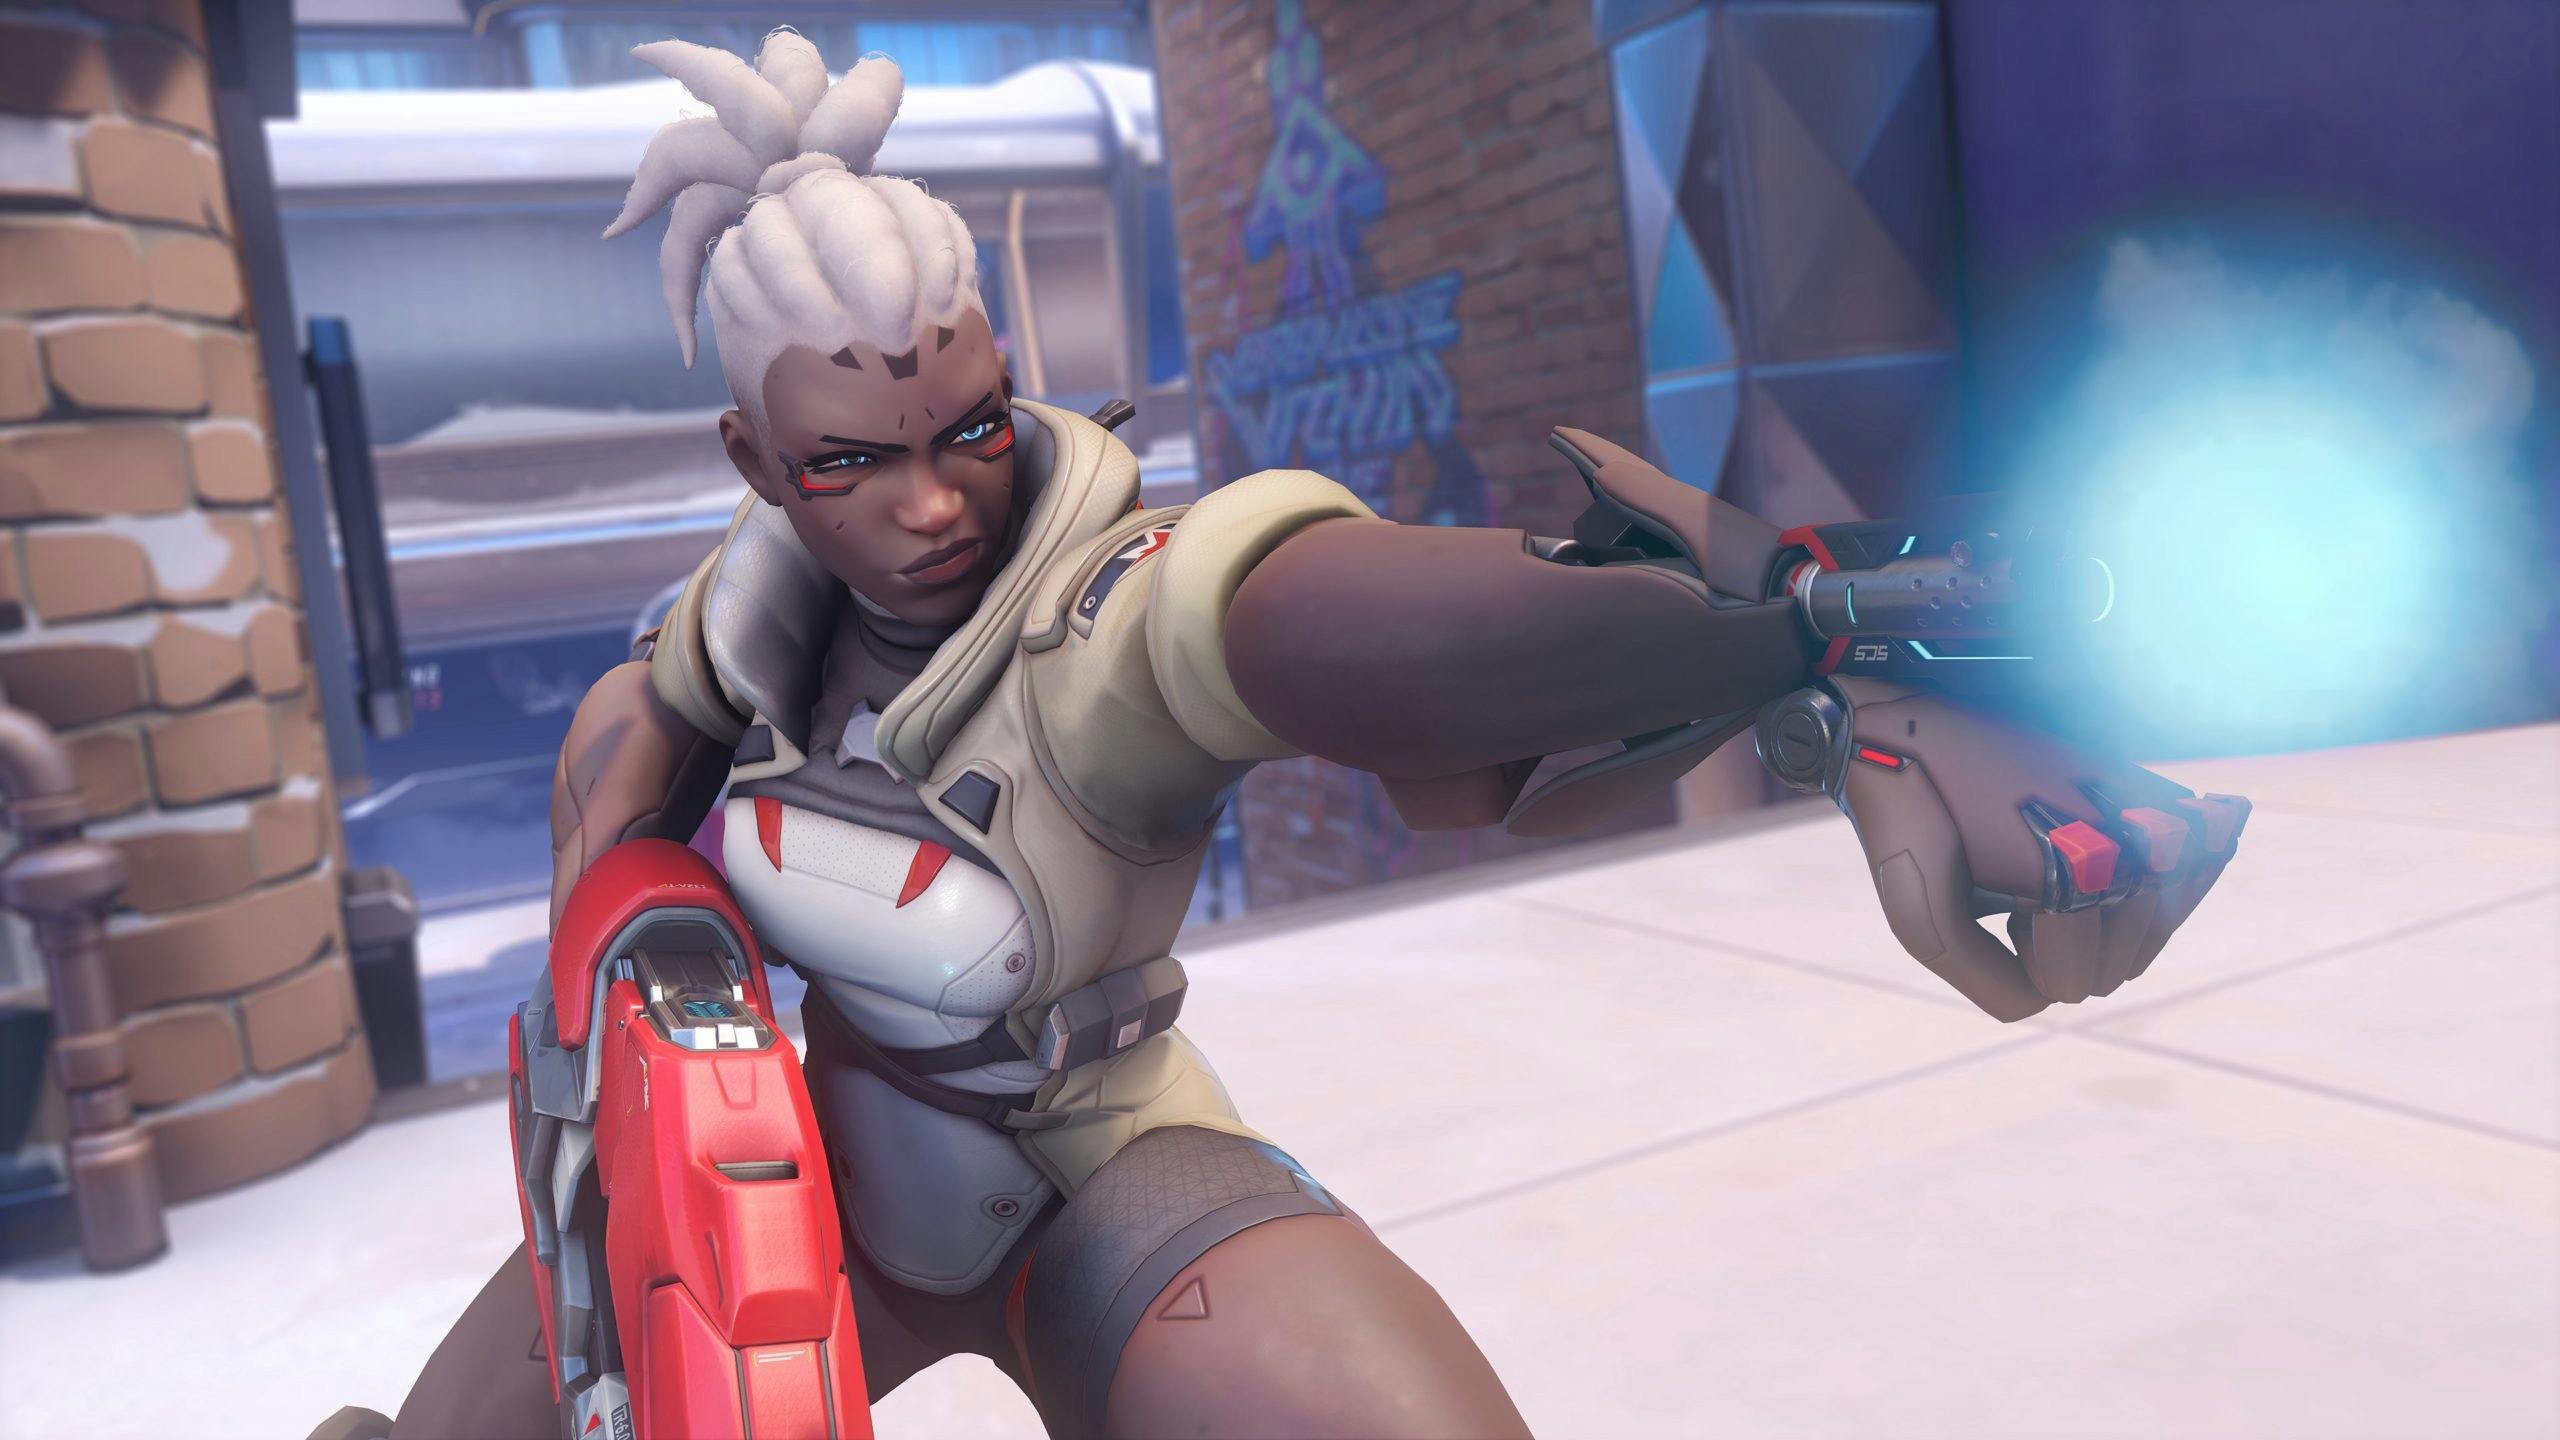 Calling All Heroes: Overwatch League, Blizzard introduce new inclusivity program for underrepresented genders